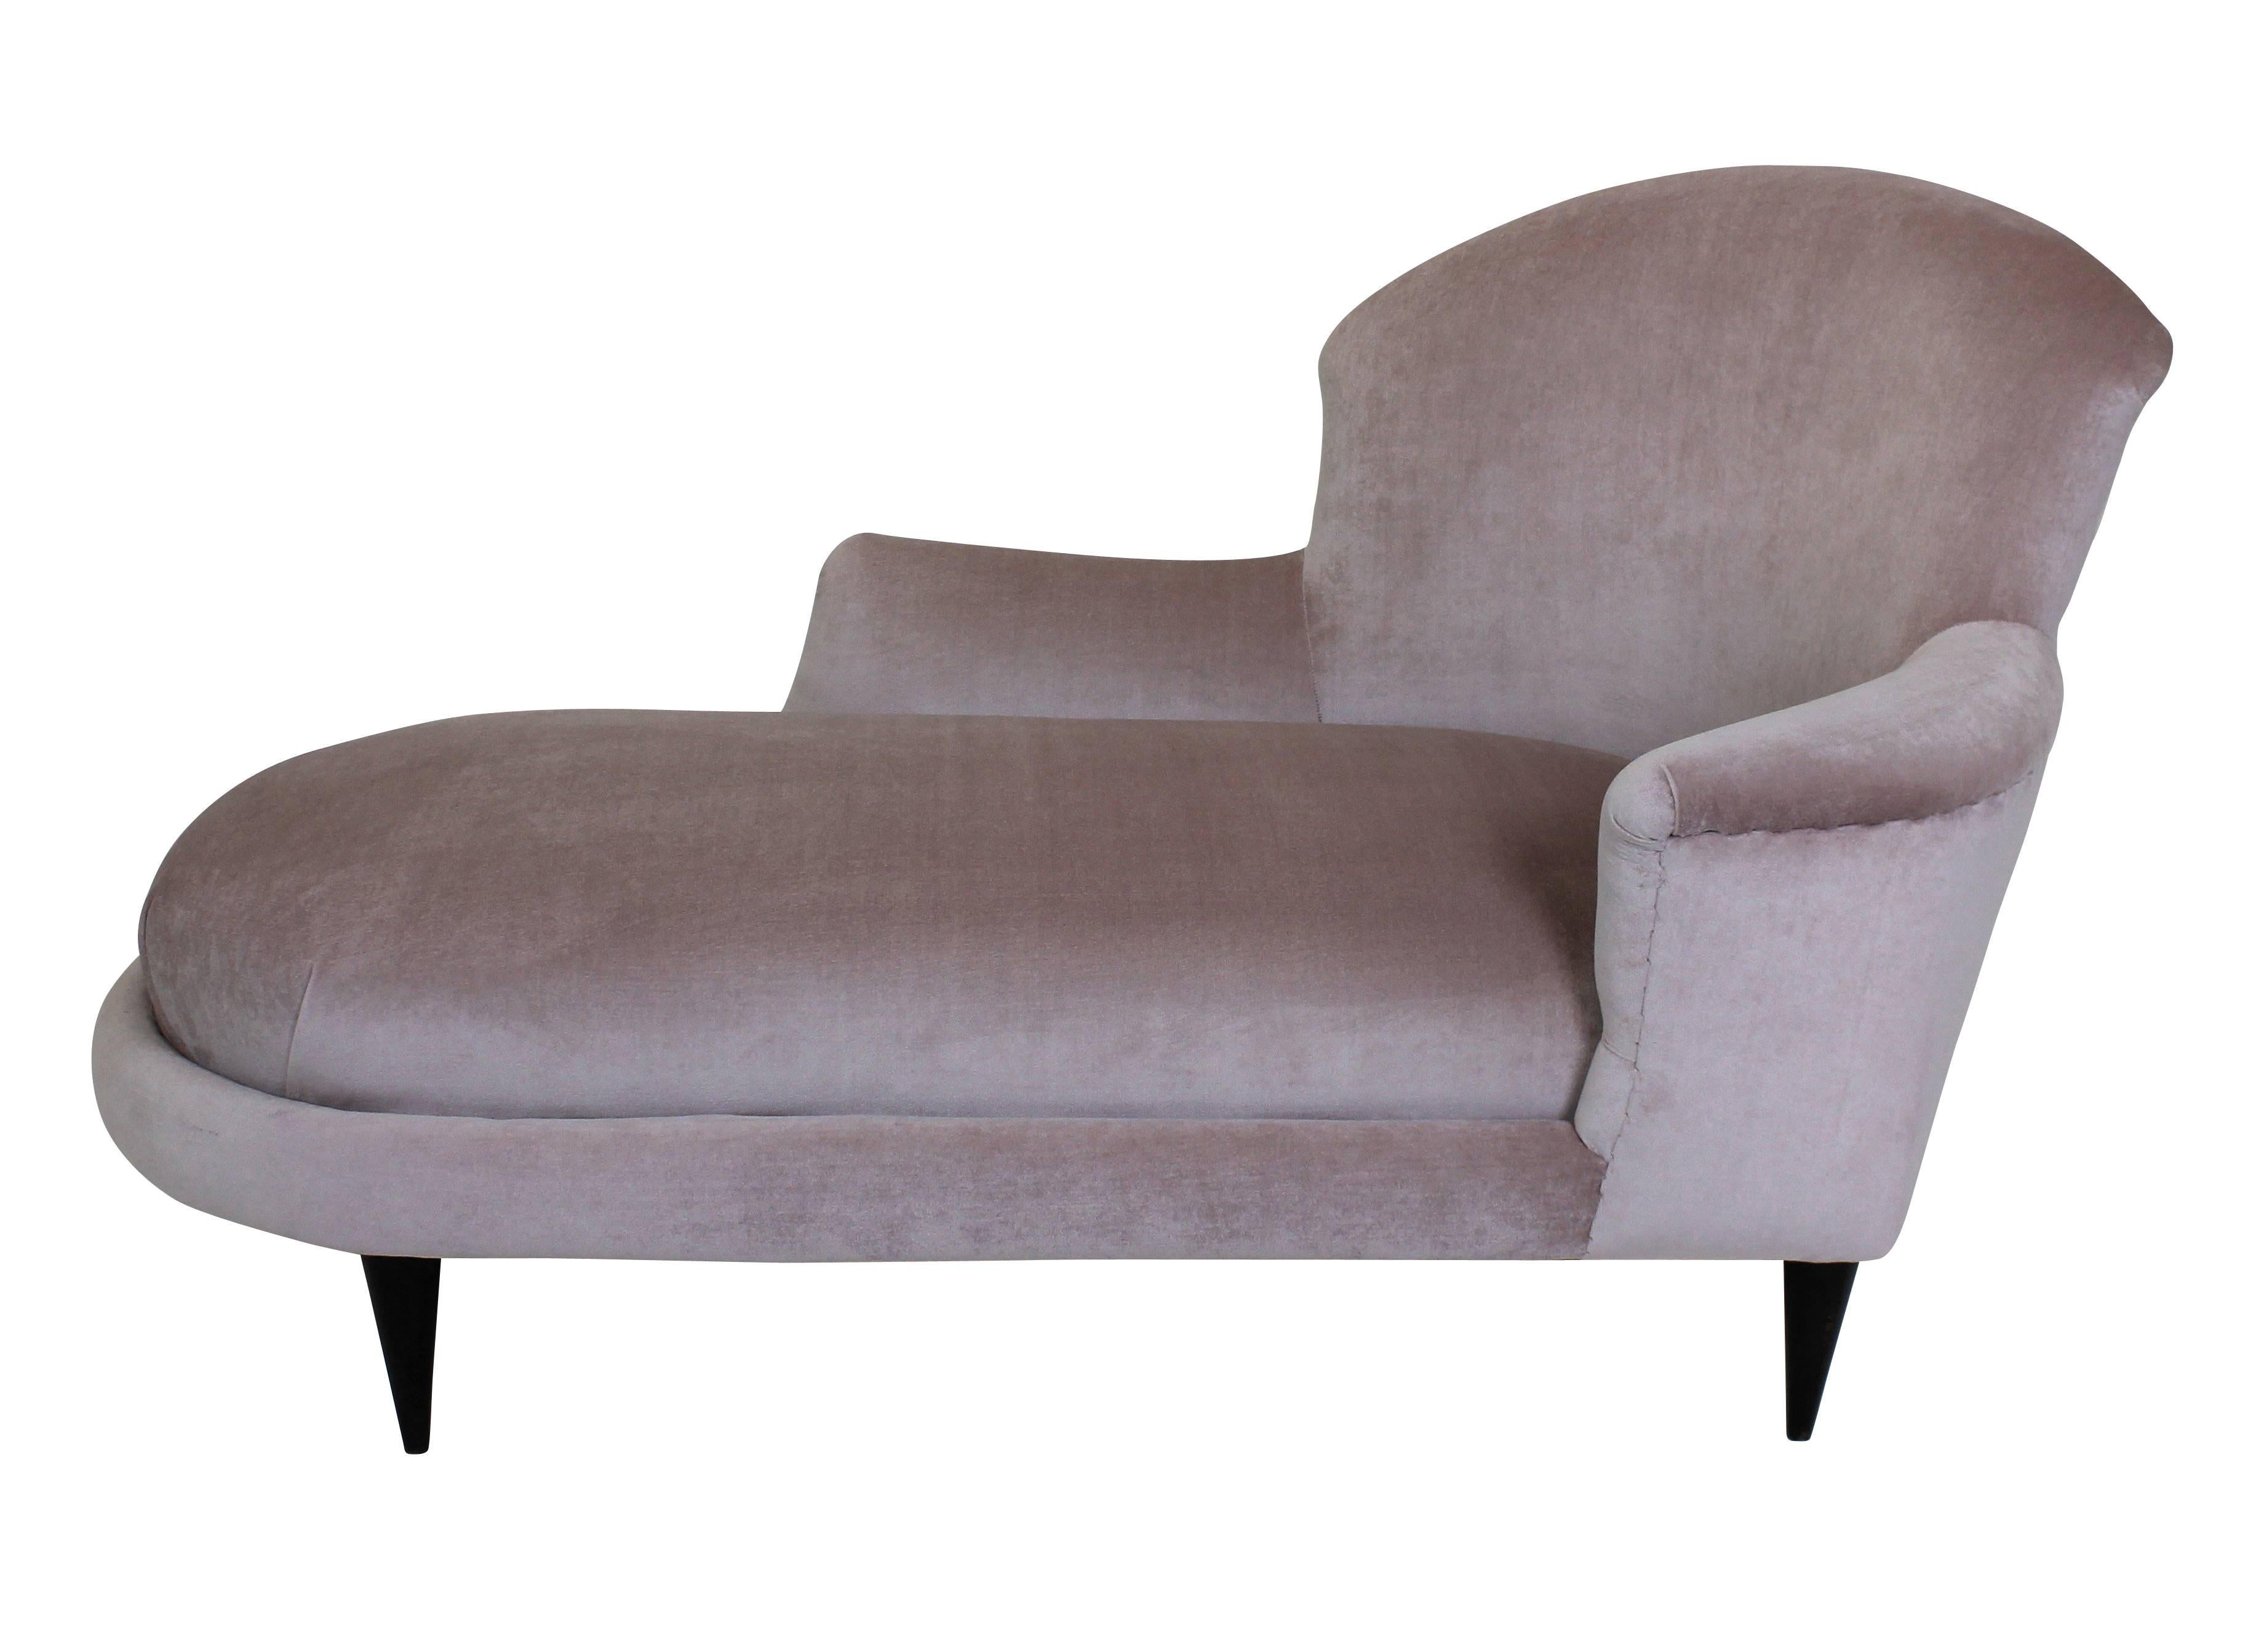 An Italian ladies daybed on tapering legs, newly upholstered in a dusty pink velvet.